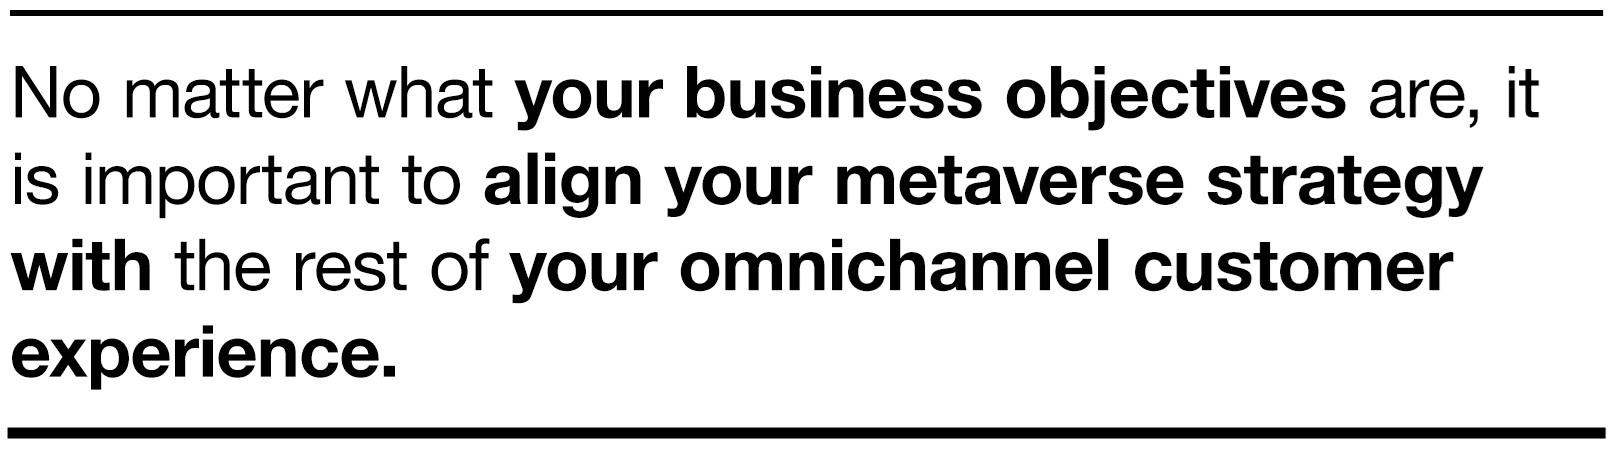 No matter what your business objectives are, it is important to align your metaverse strategy with the rest of your omnichannel customer experience.